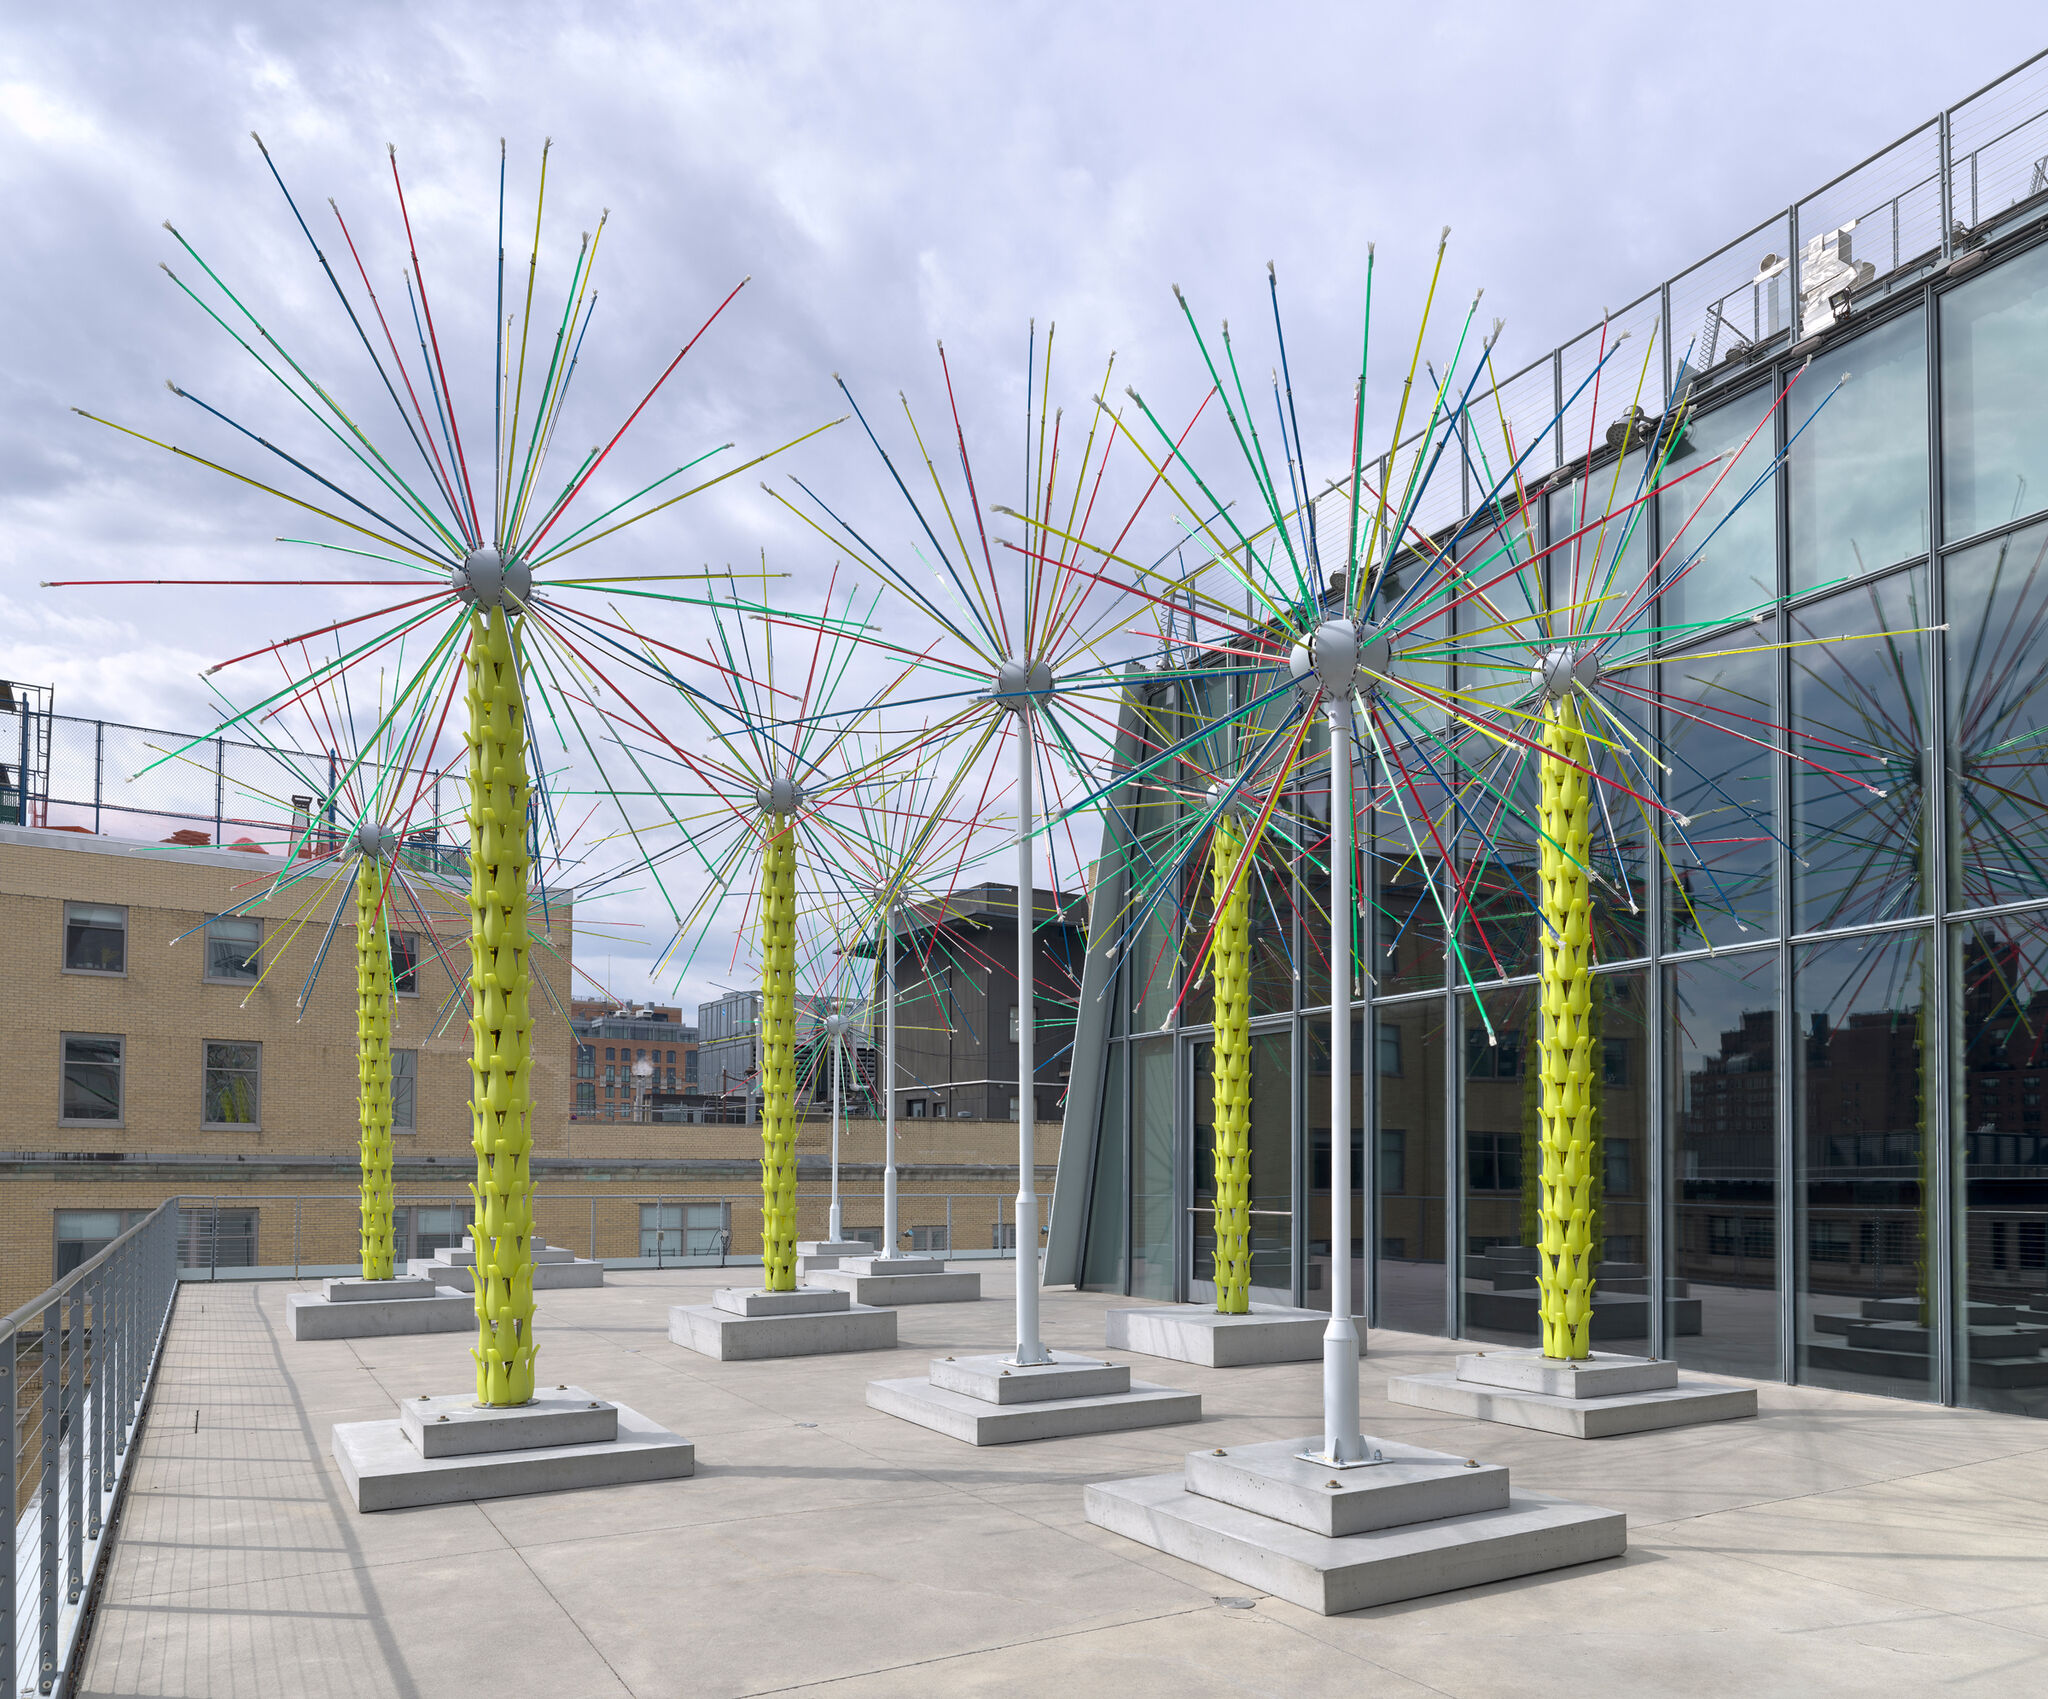 An outdoor installation of several tree-like objects with radiating straight thin sticks on top of of each.